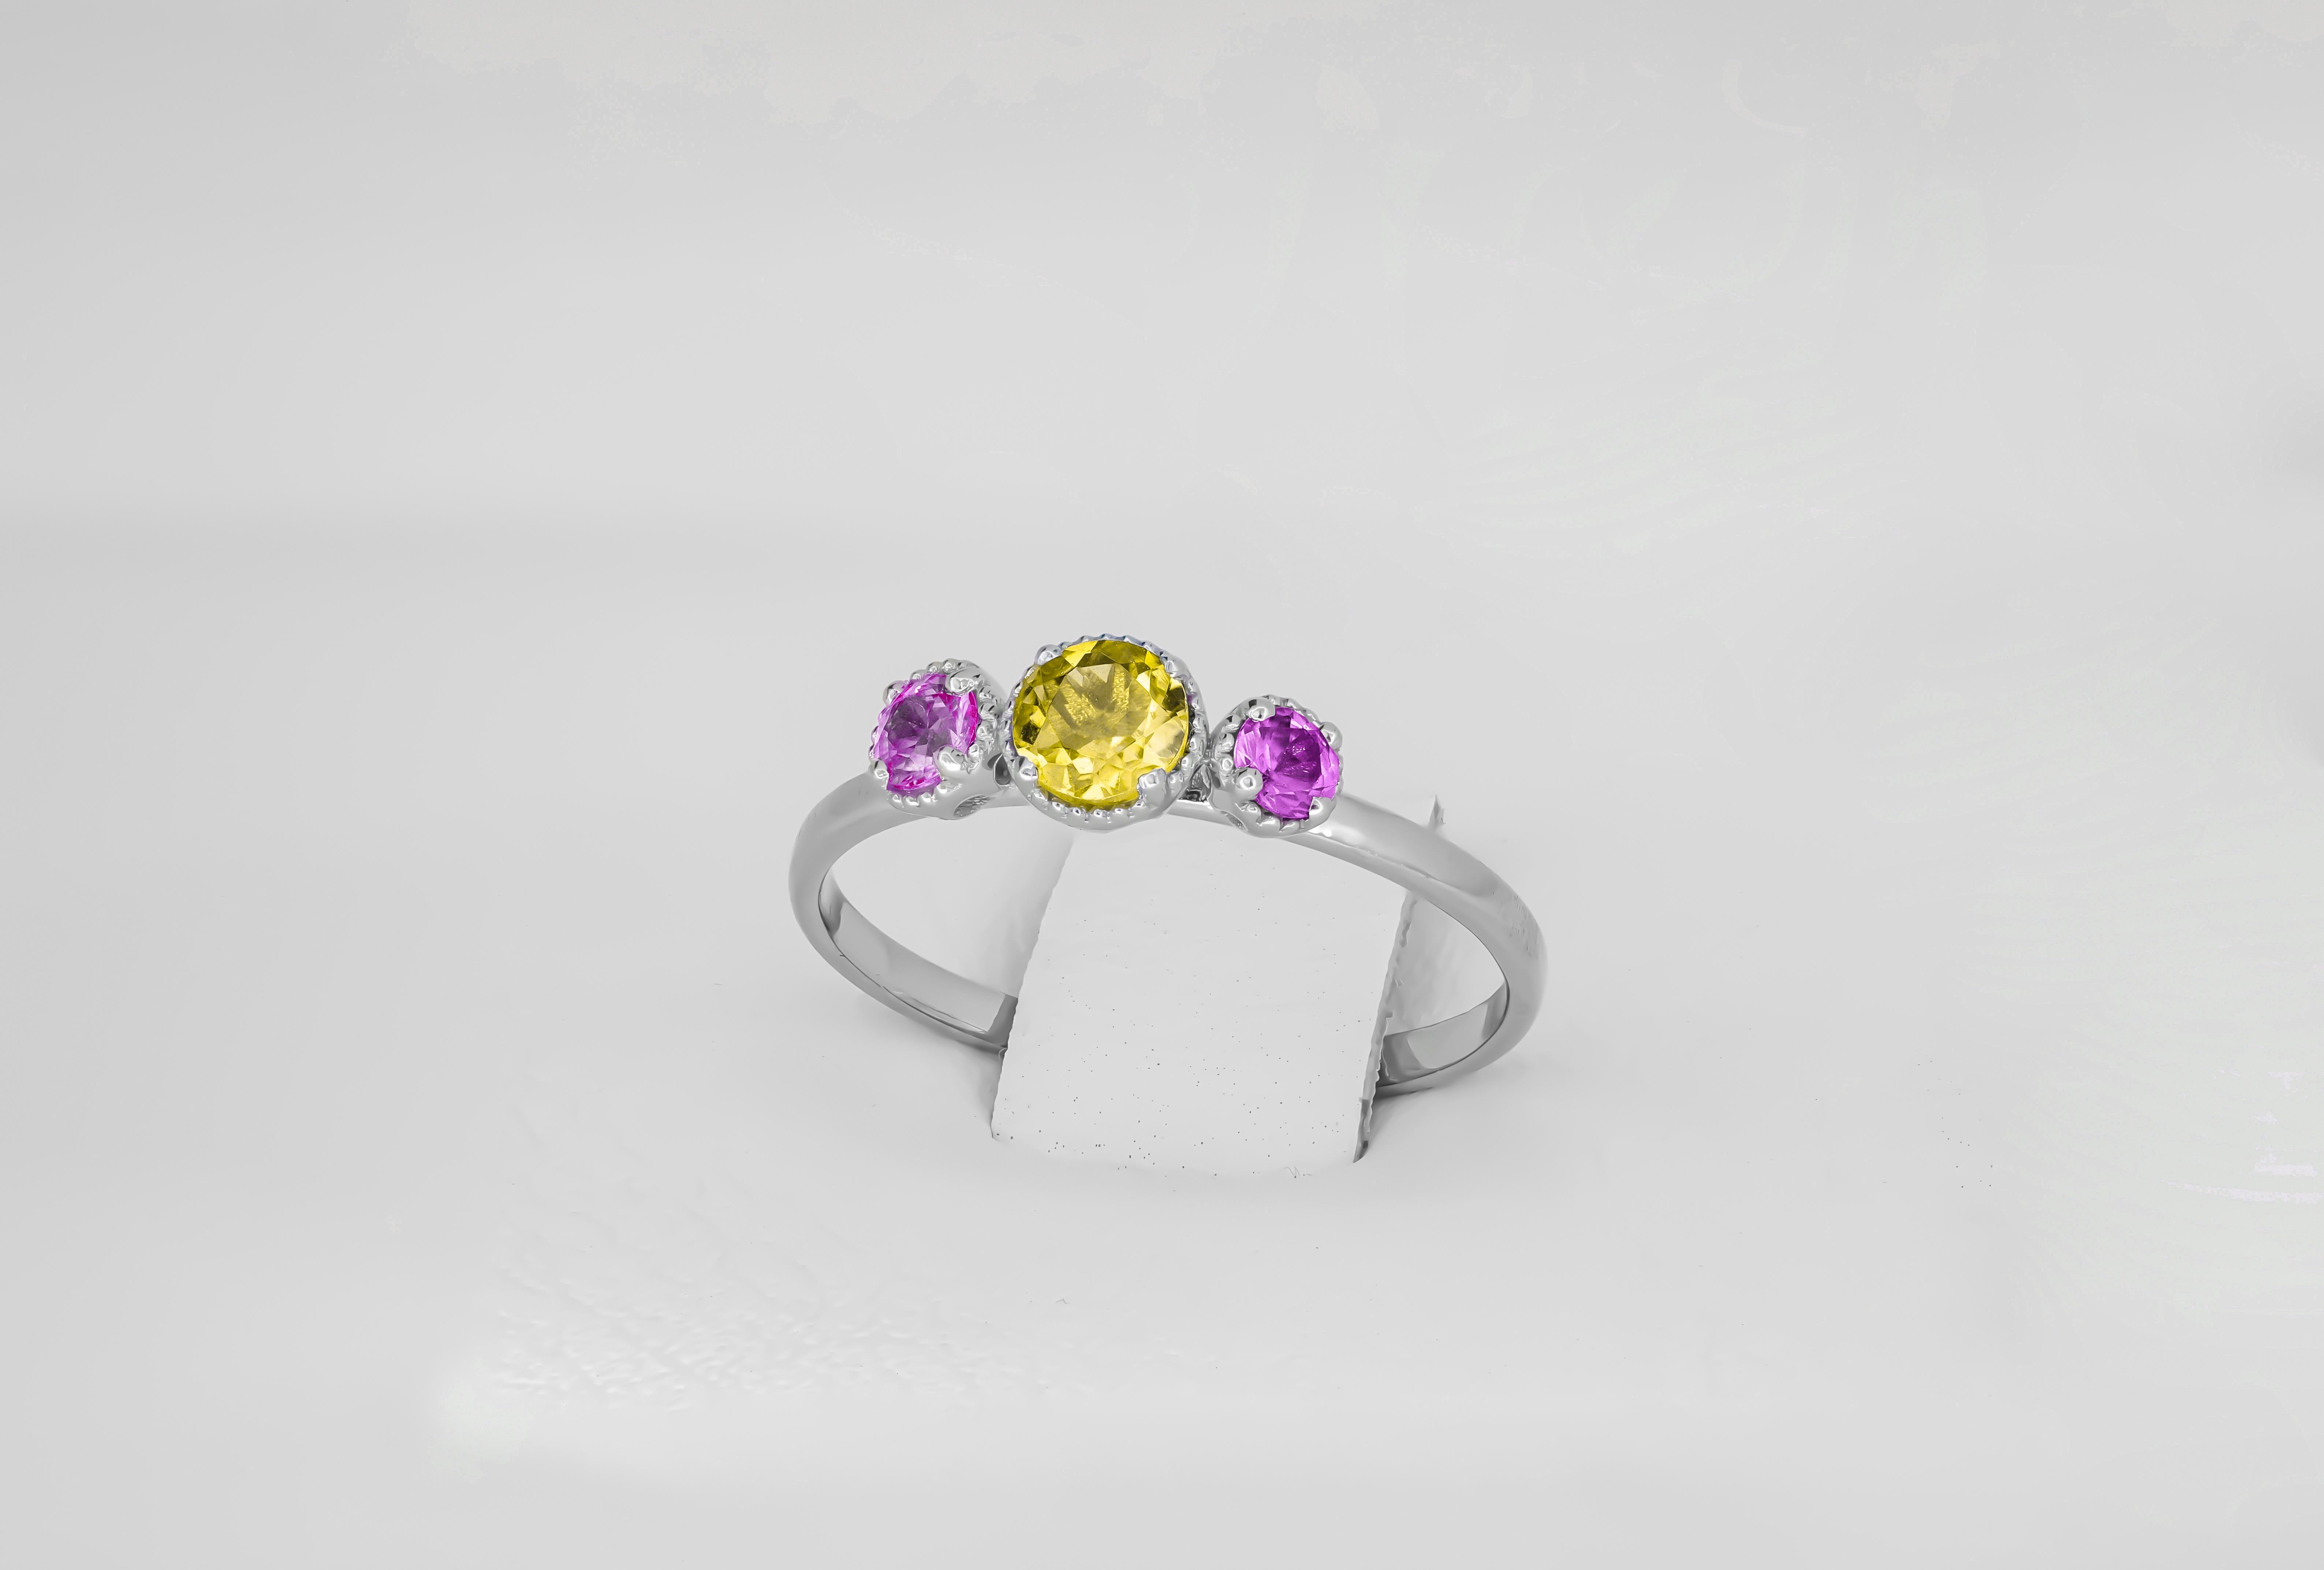 For Sale:  Trio gems 14k gold ring. 6